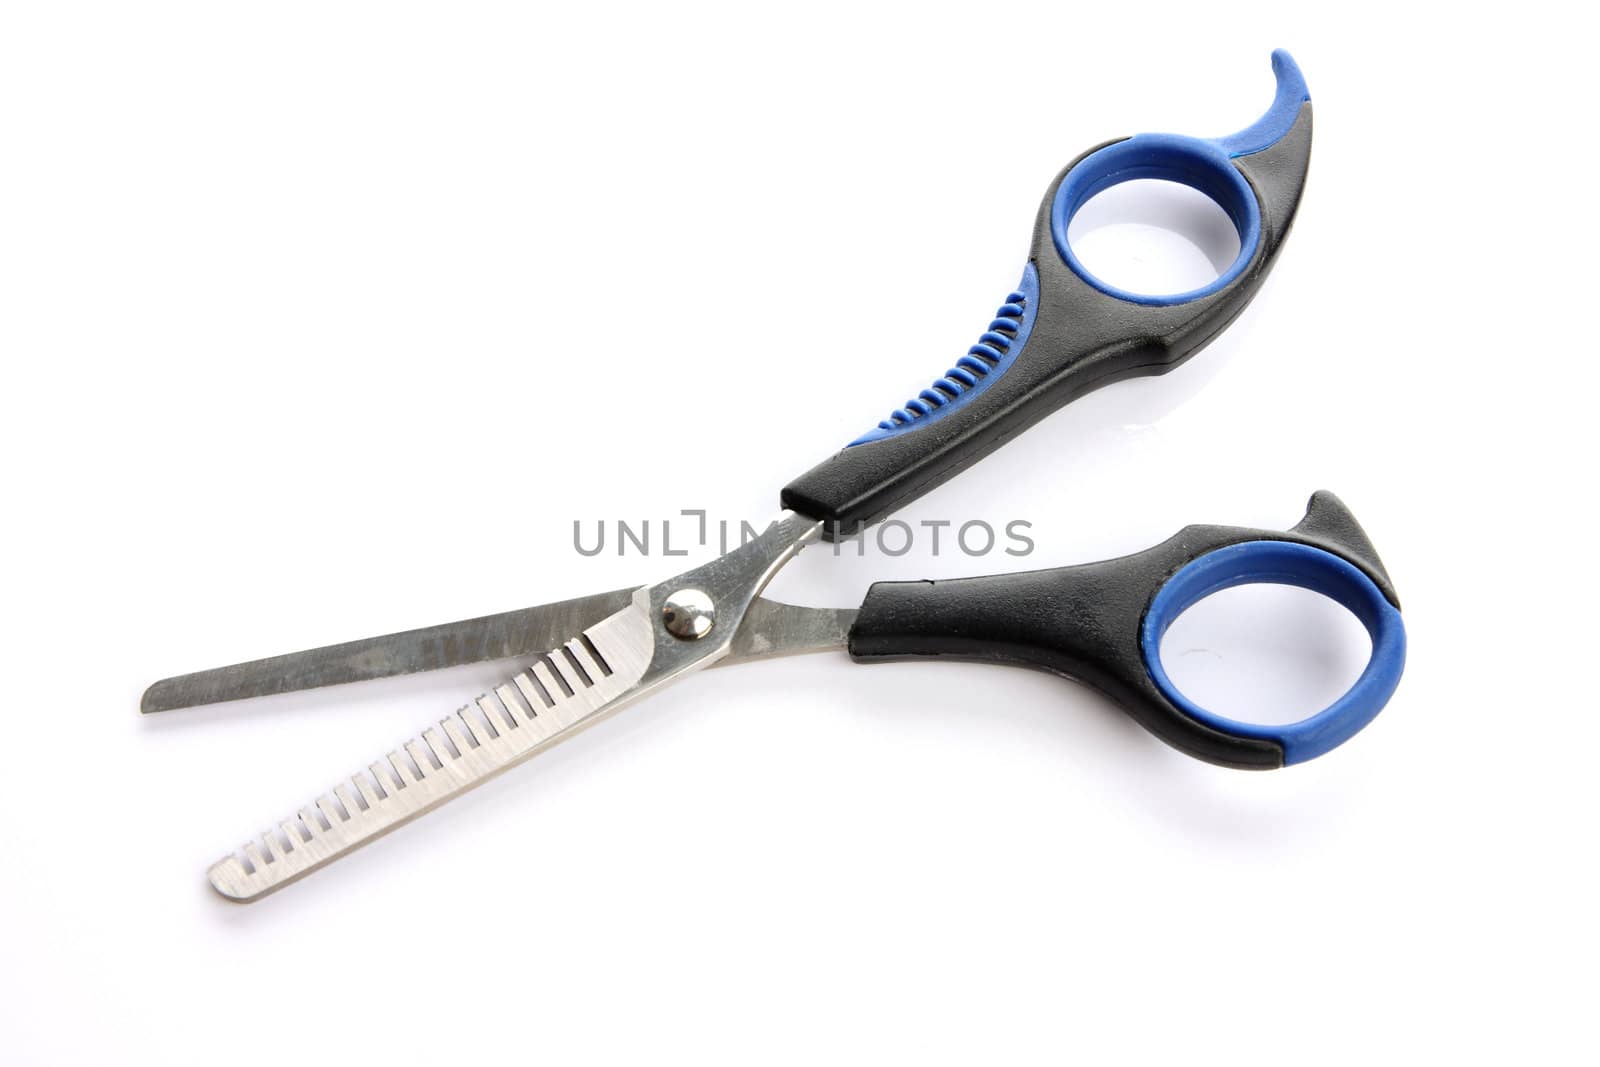 Hair scissors by posterize